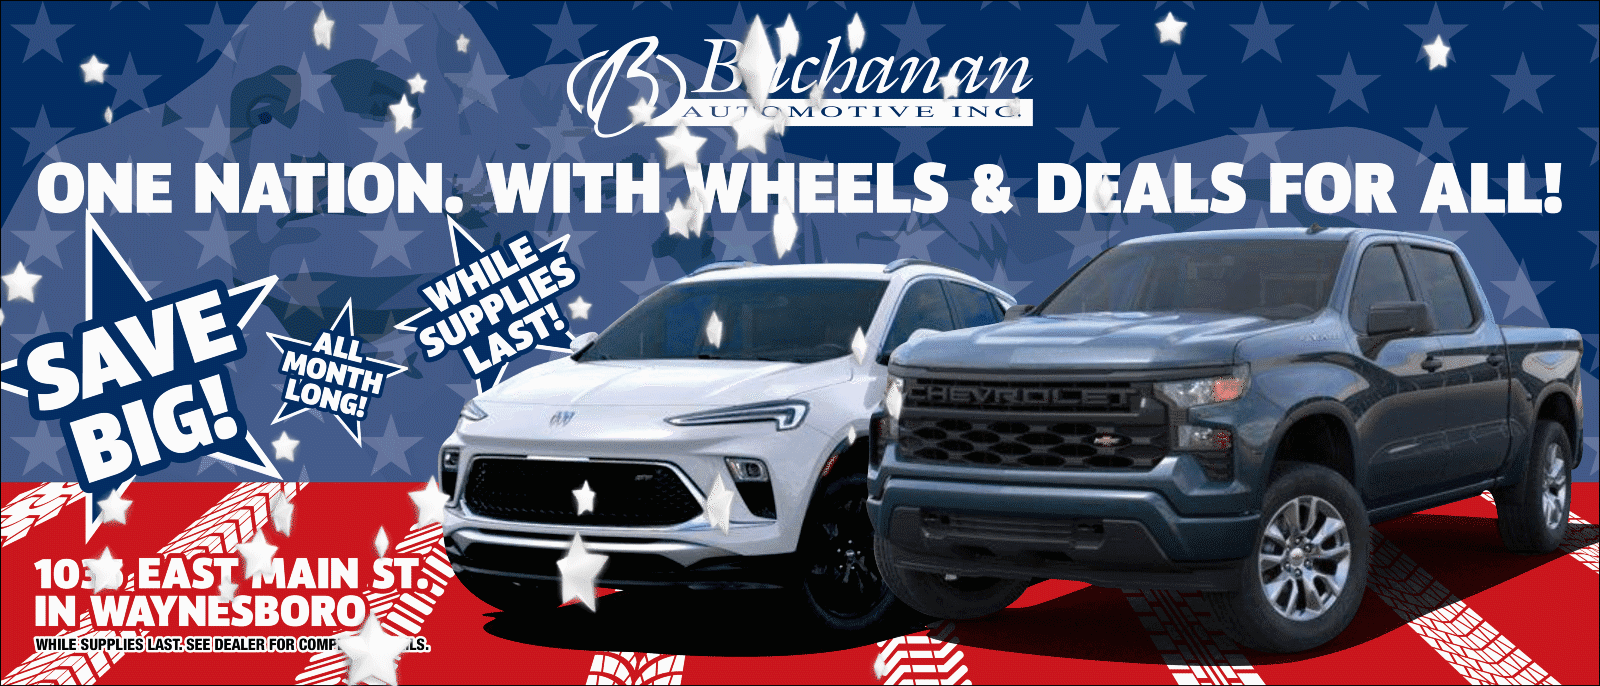 One Nation. With Wheels & Deals for All!